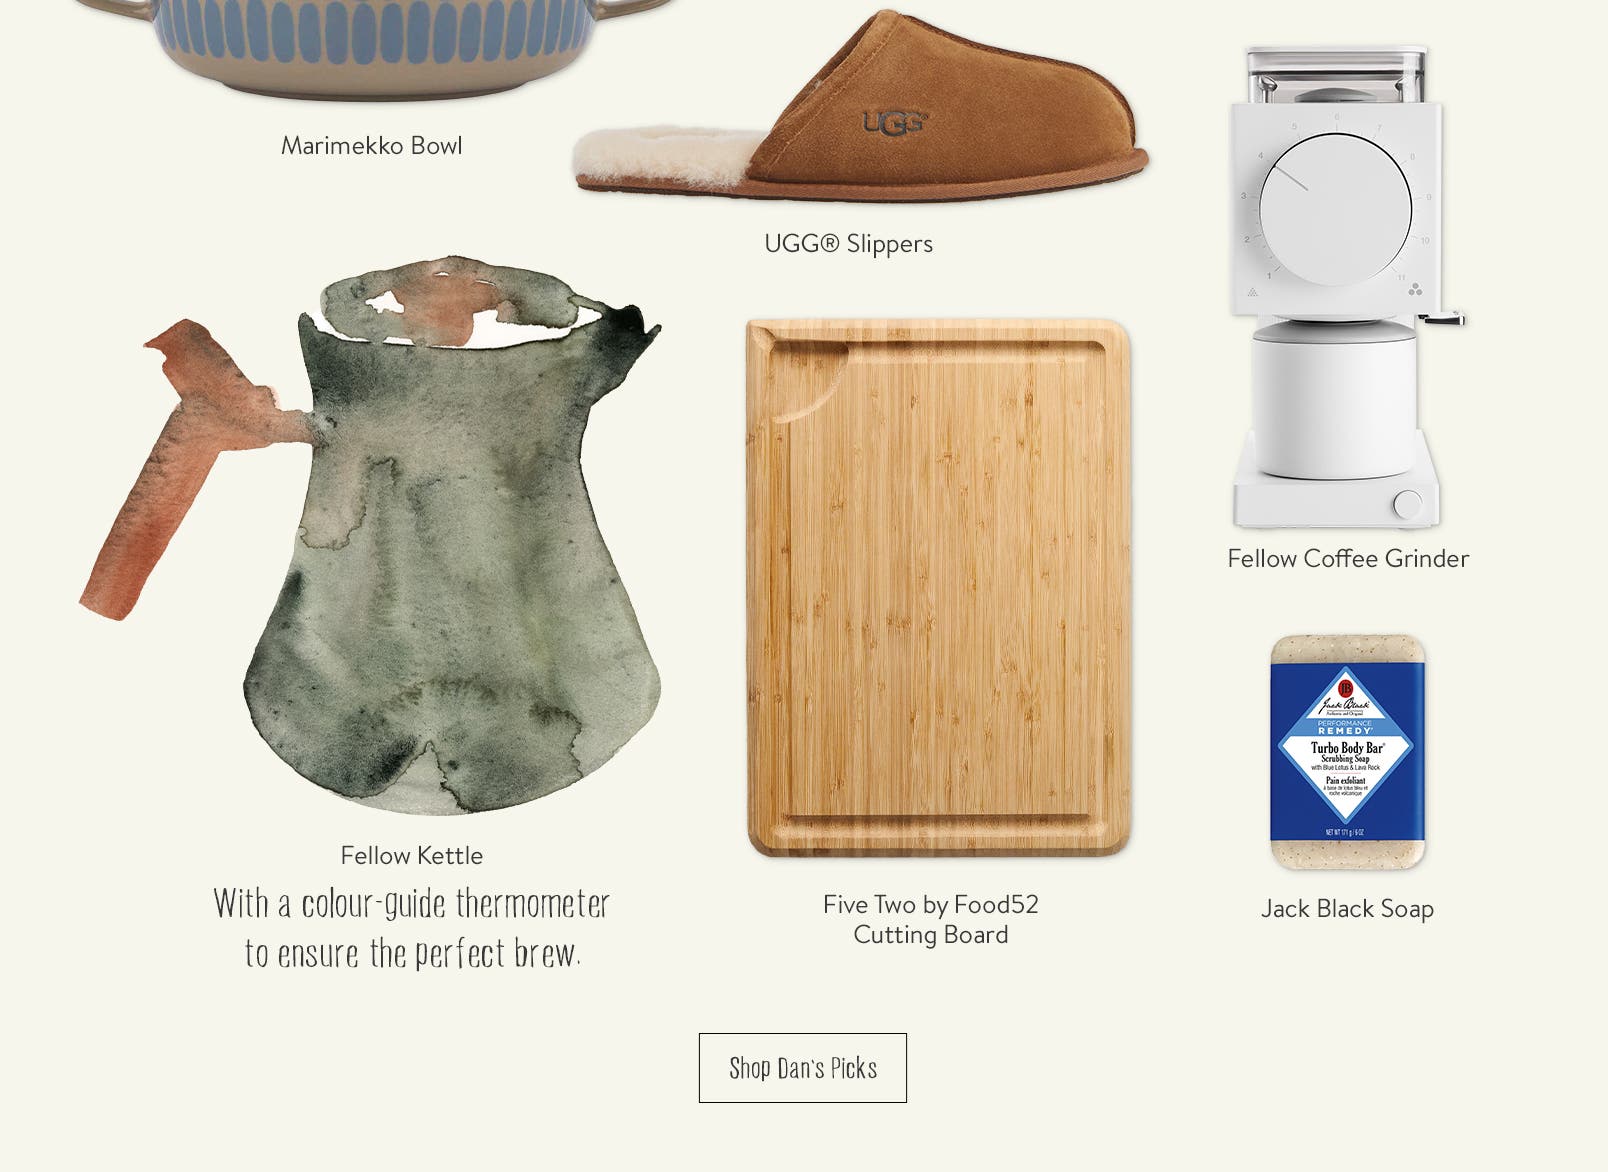 Father's Day gift picks, including cookware, kitchenware and fragrance.